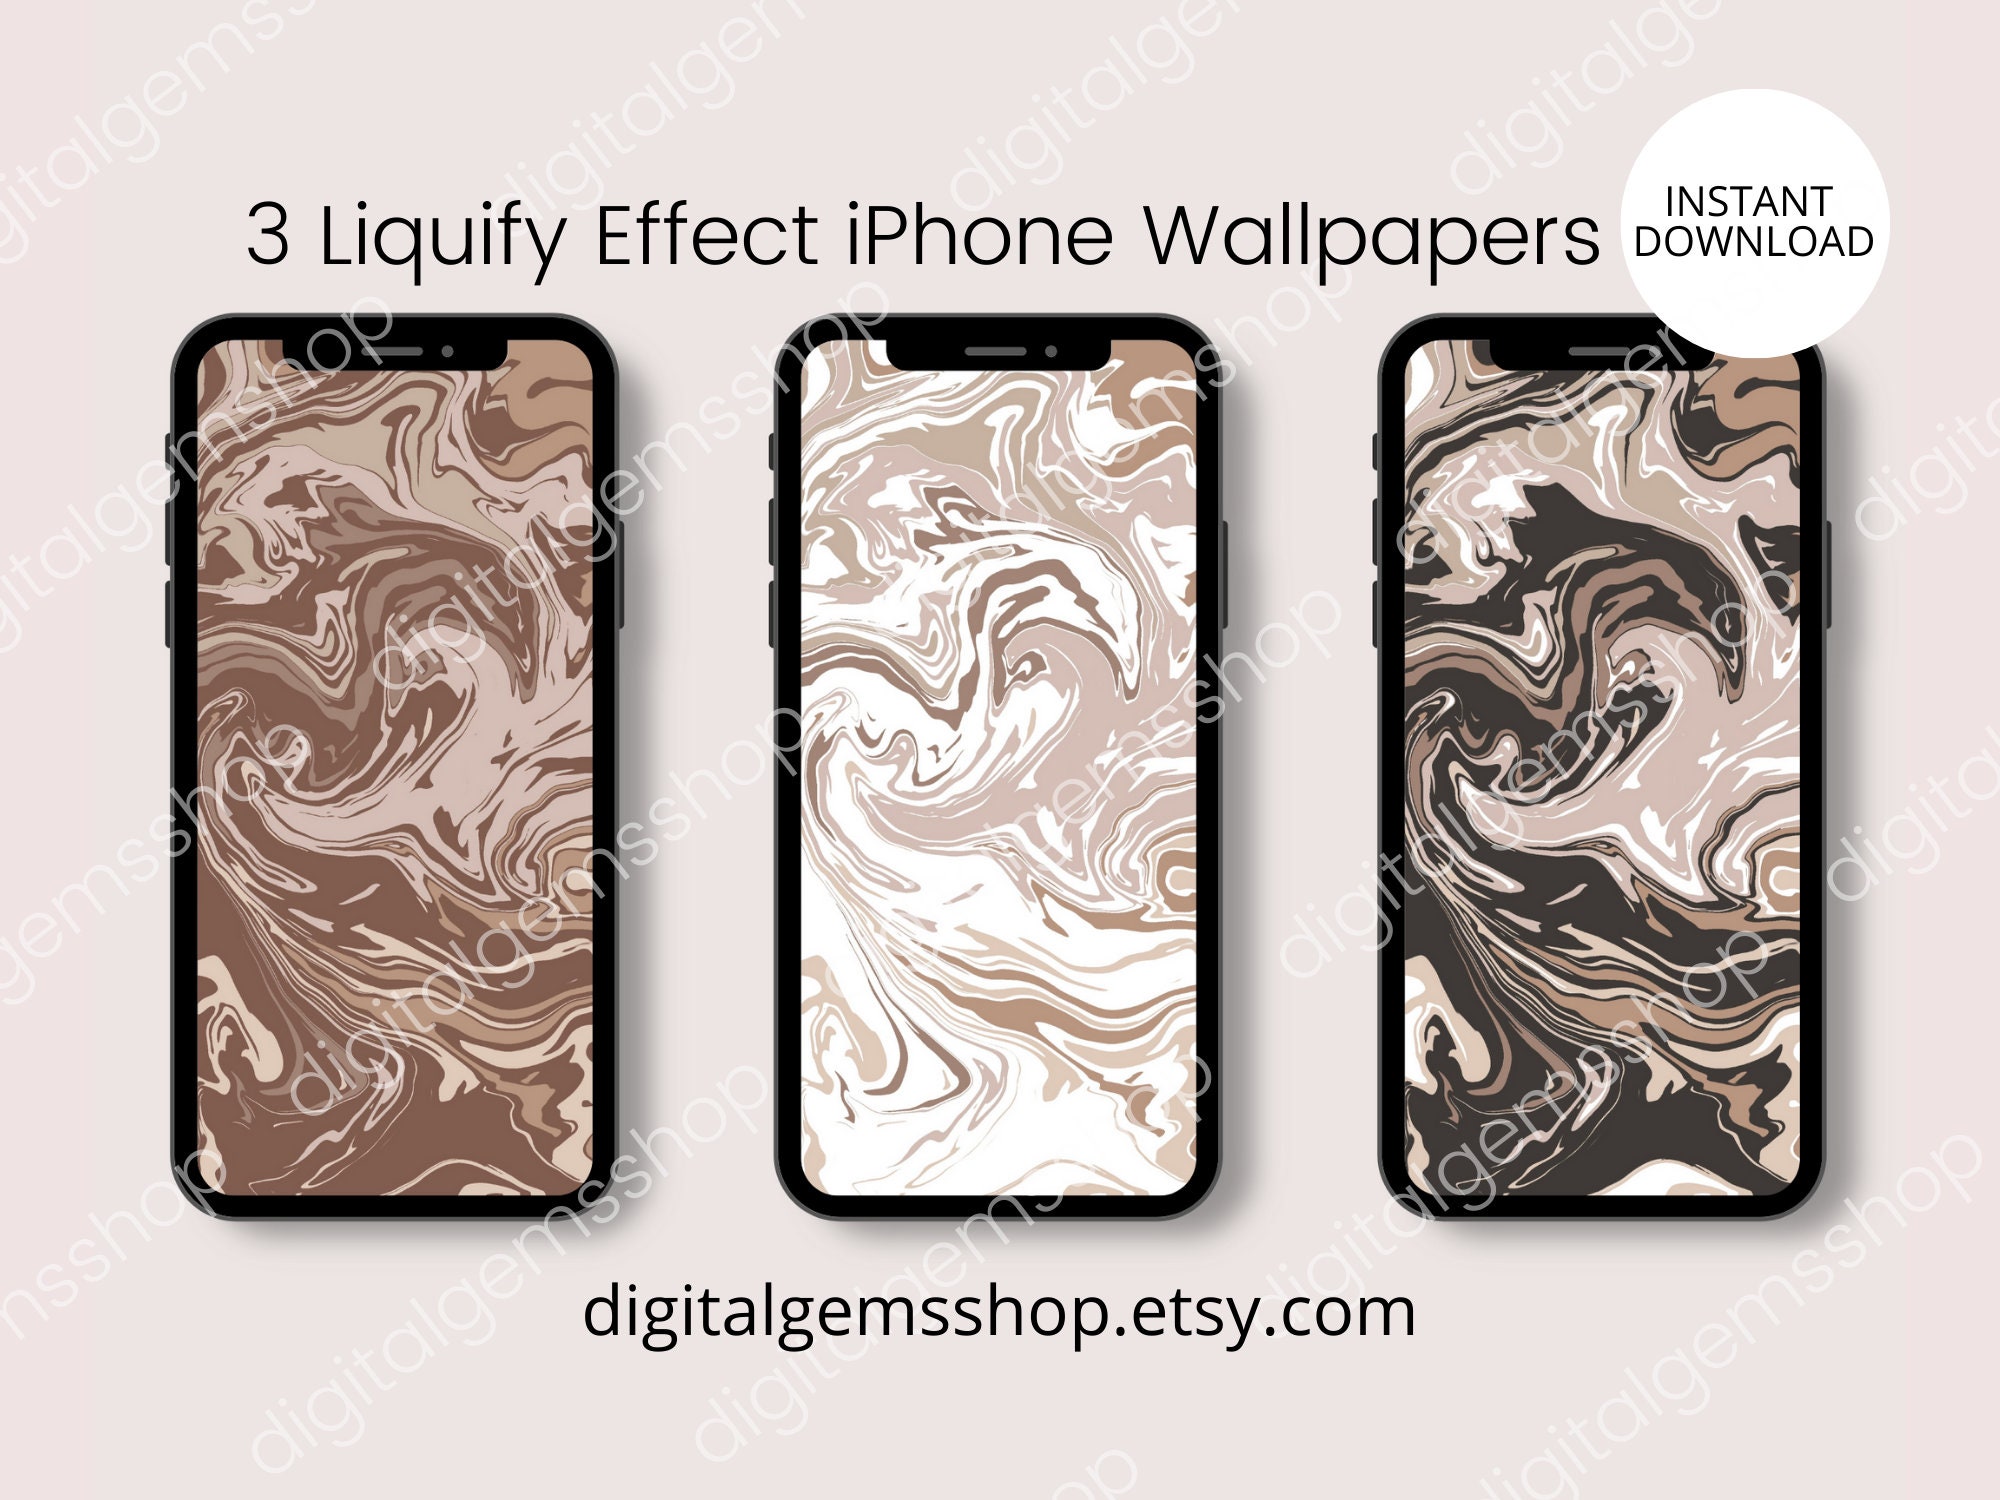 3 Liquify Iphone Wallpapers Aesthetic Wallpaper Iphone - Etsy